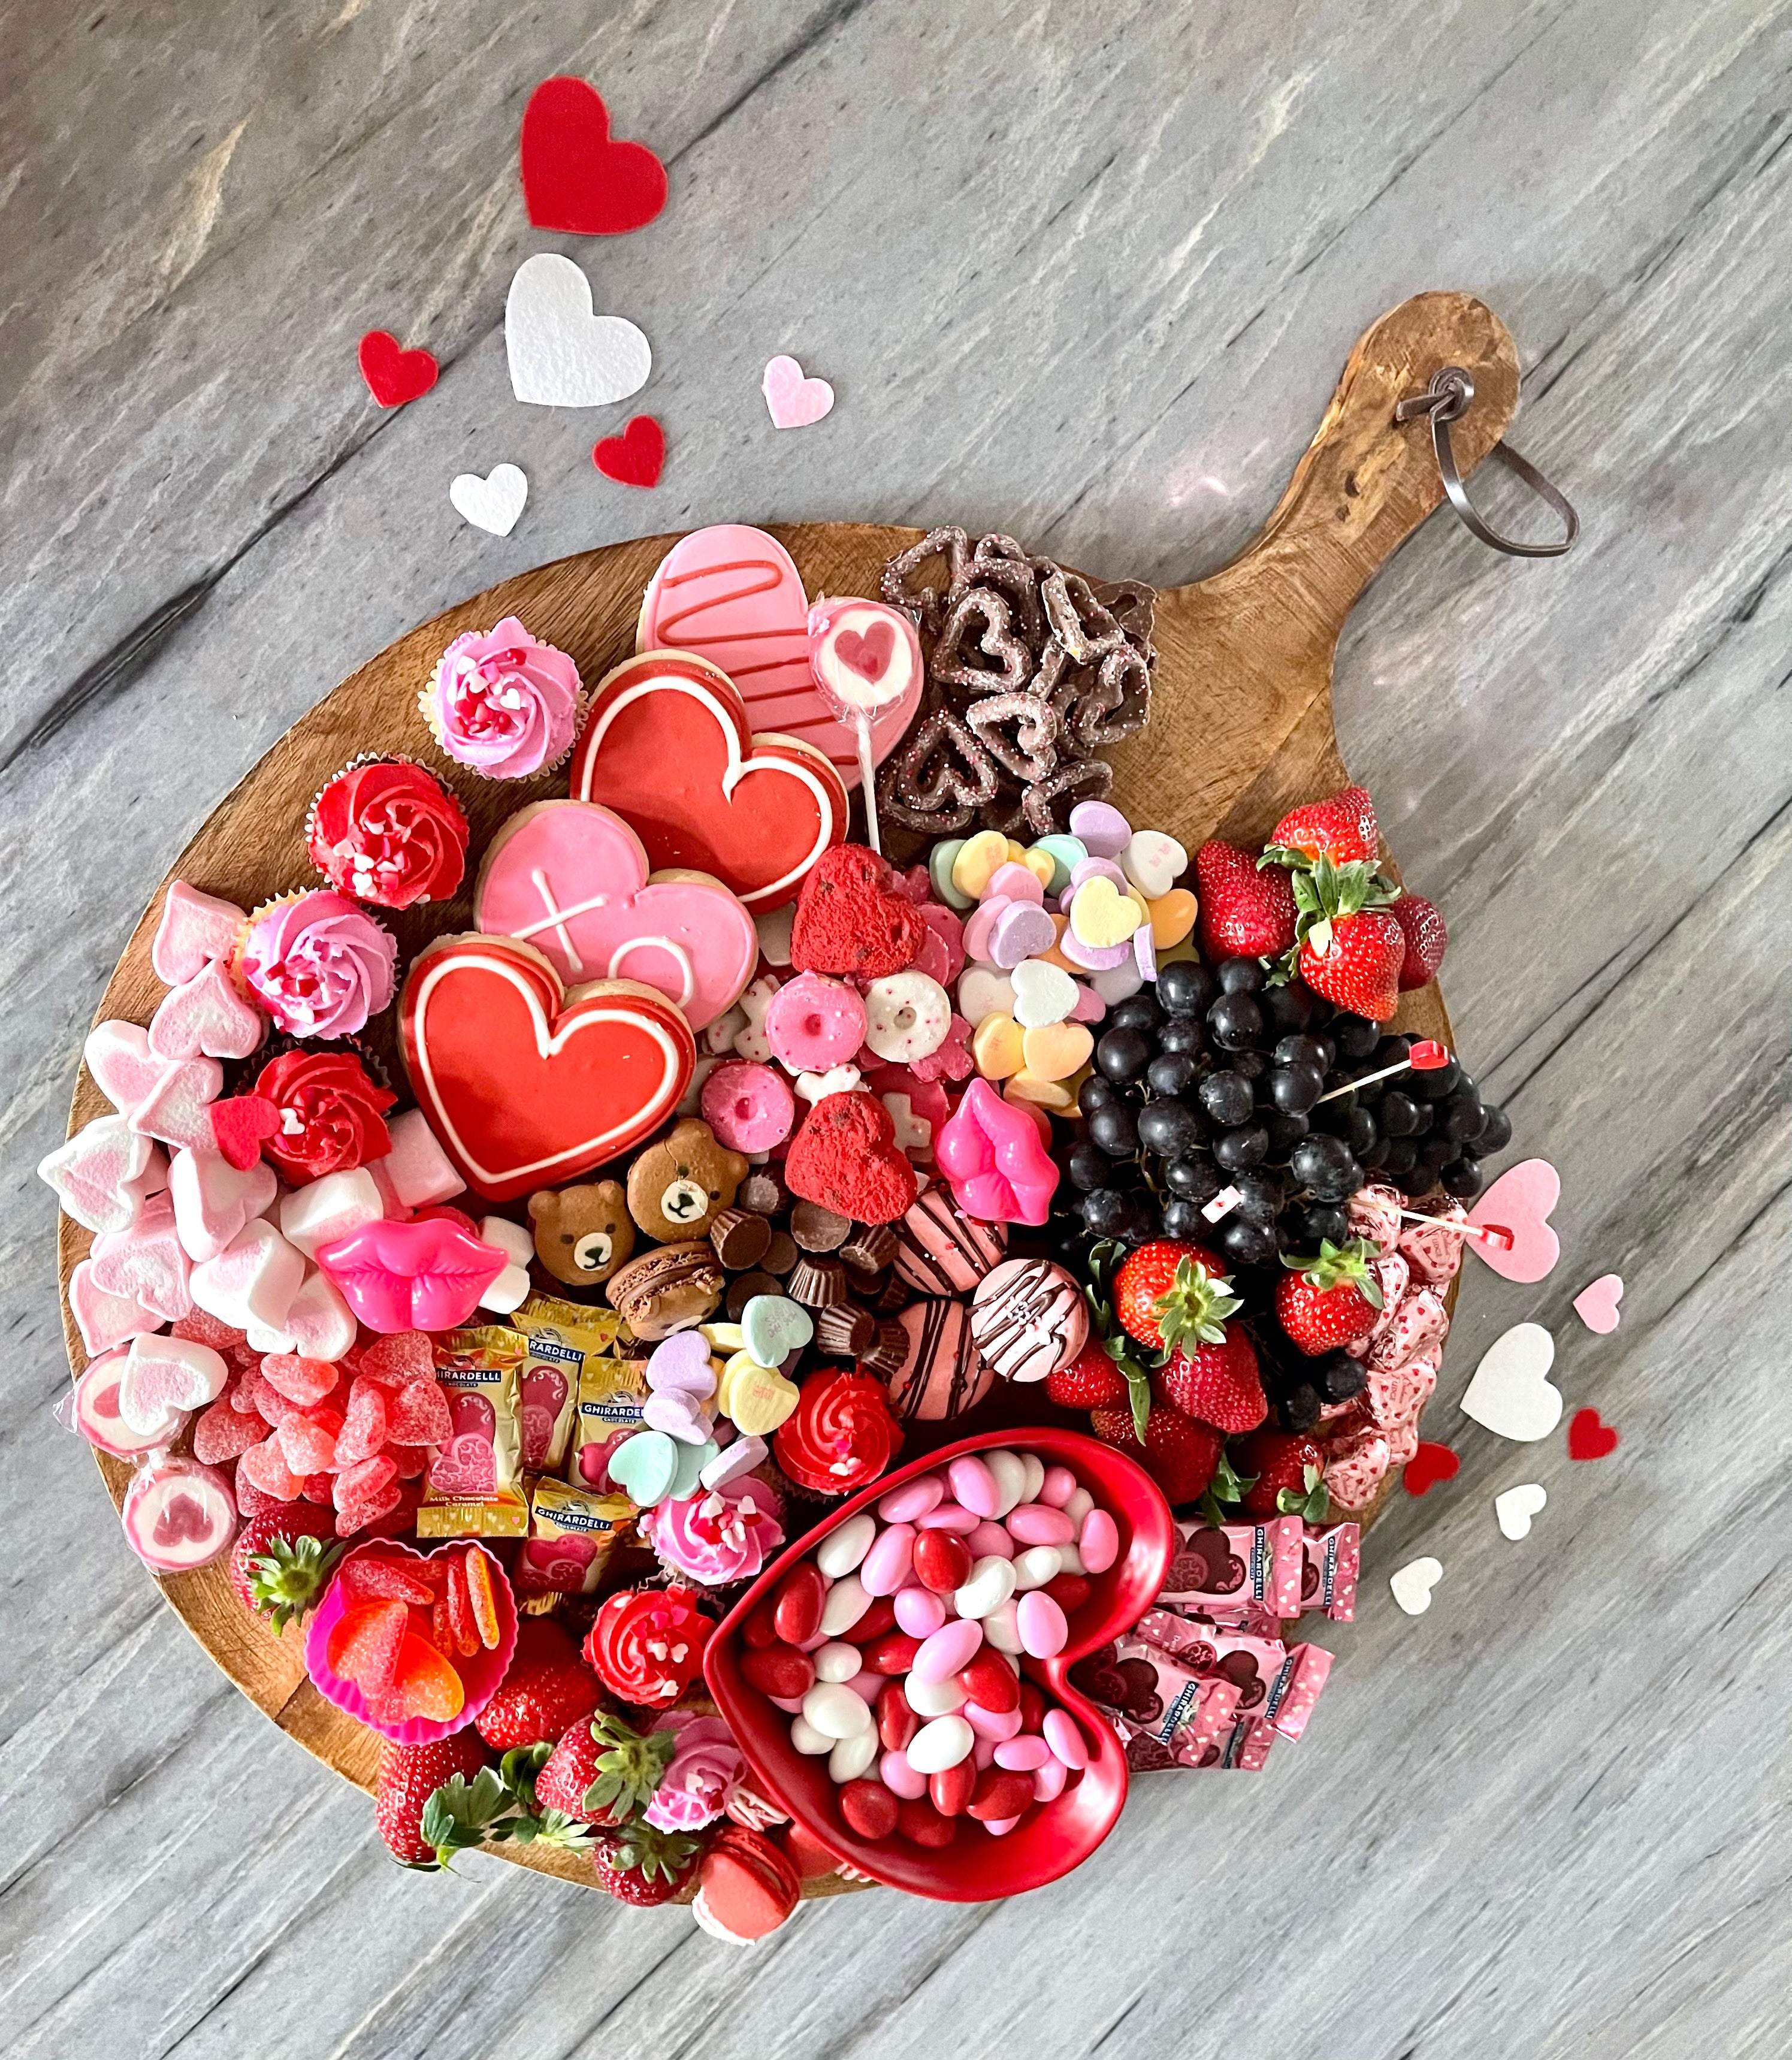 Fun Ways To Celebrate Valentine's Day From Home 2022